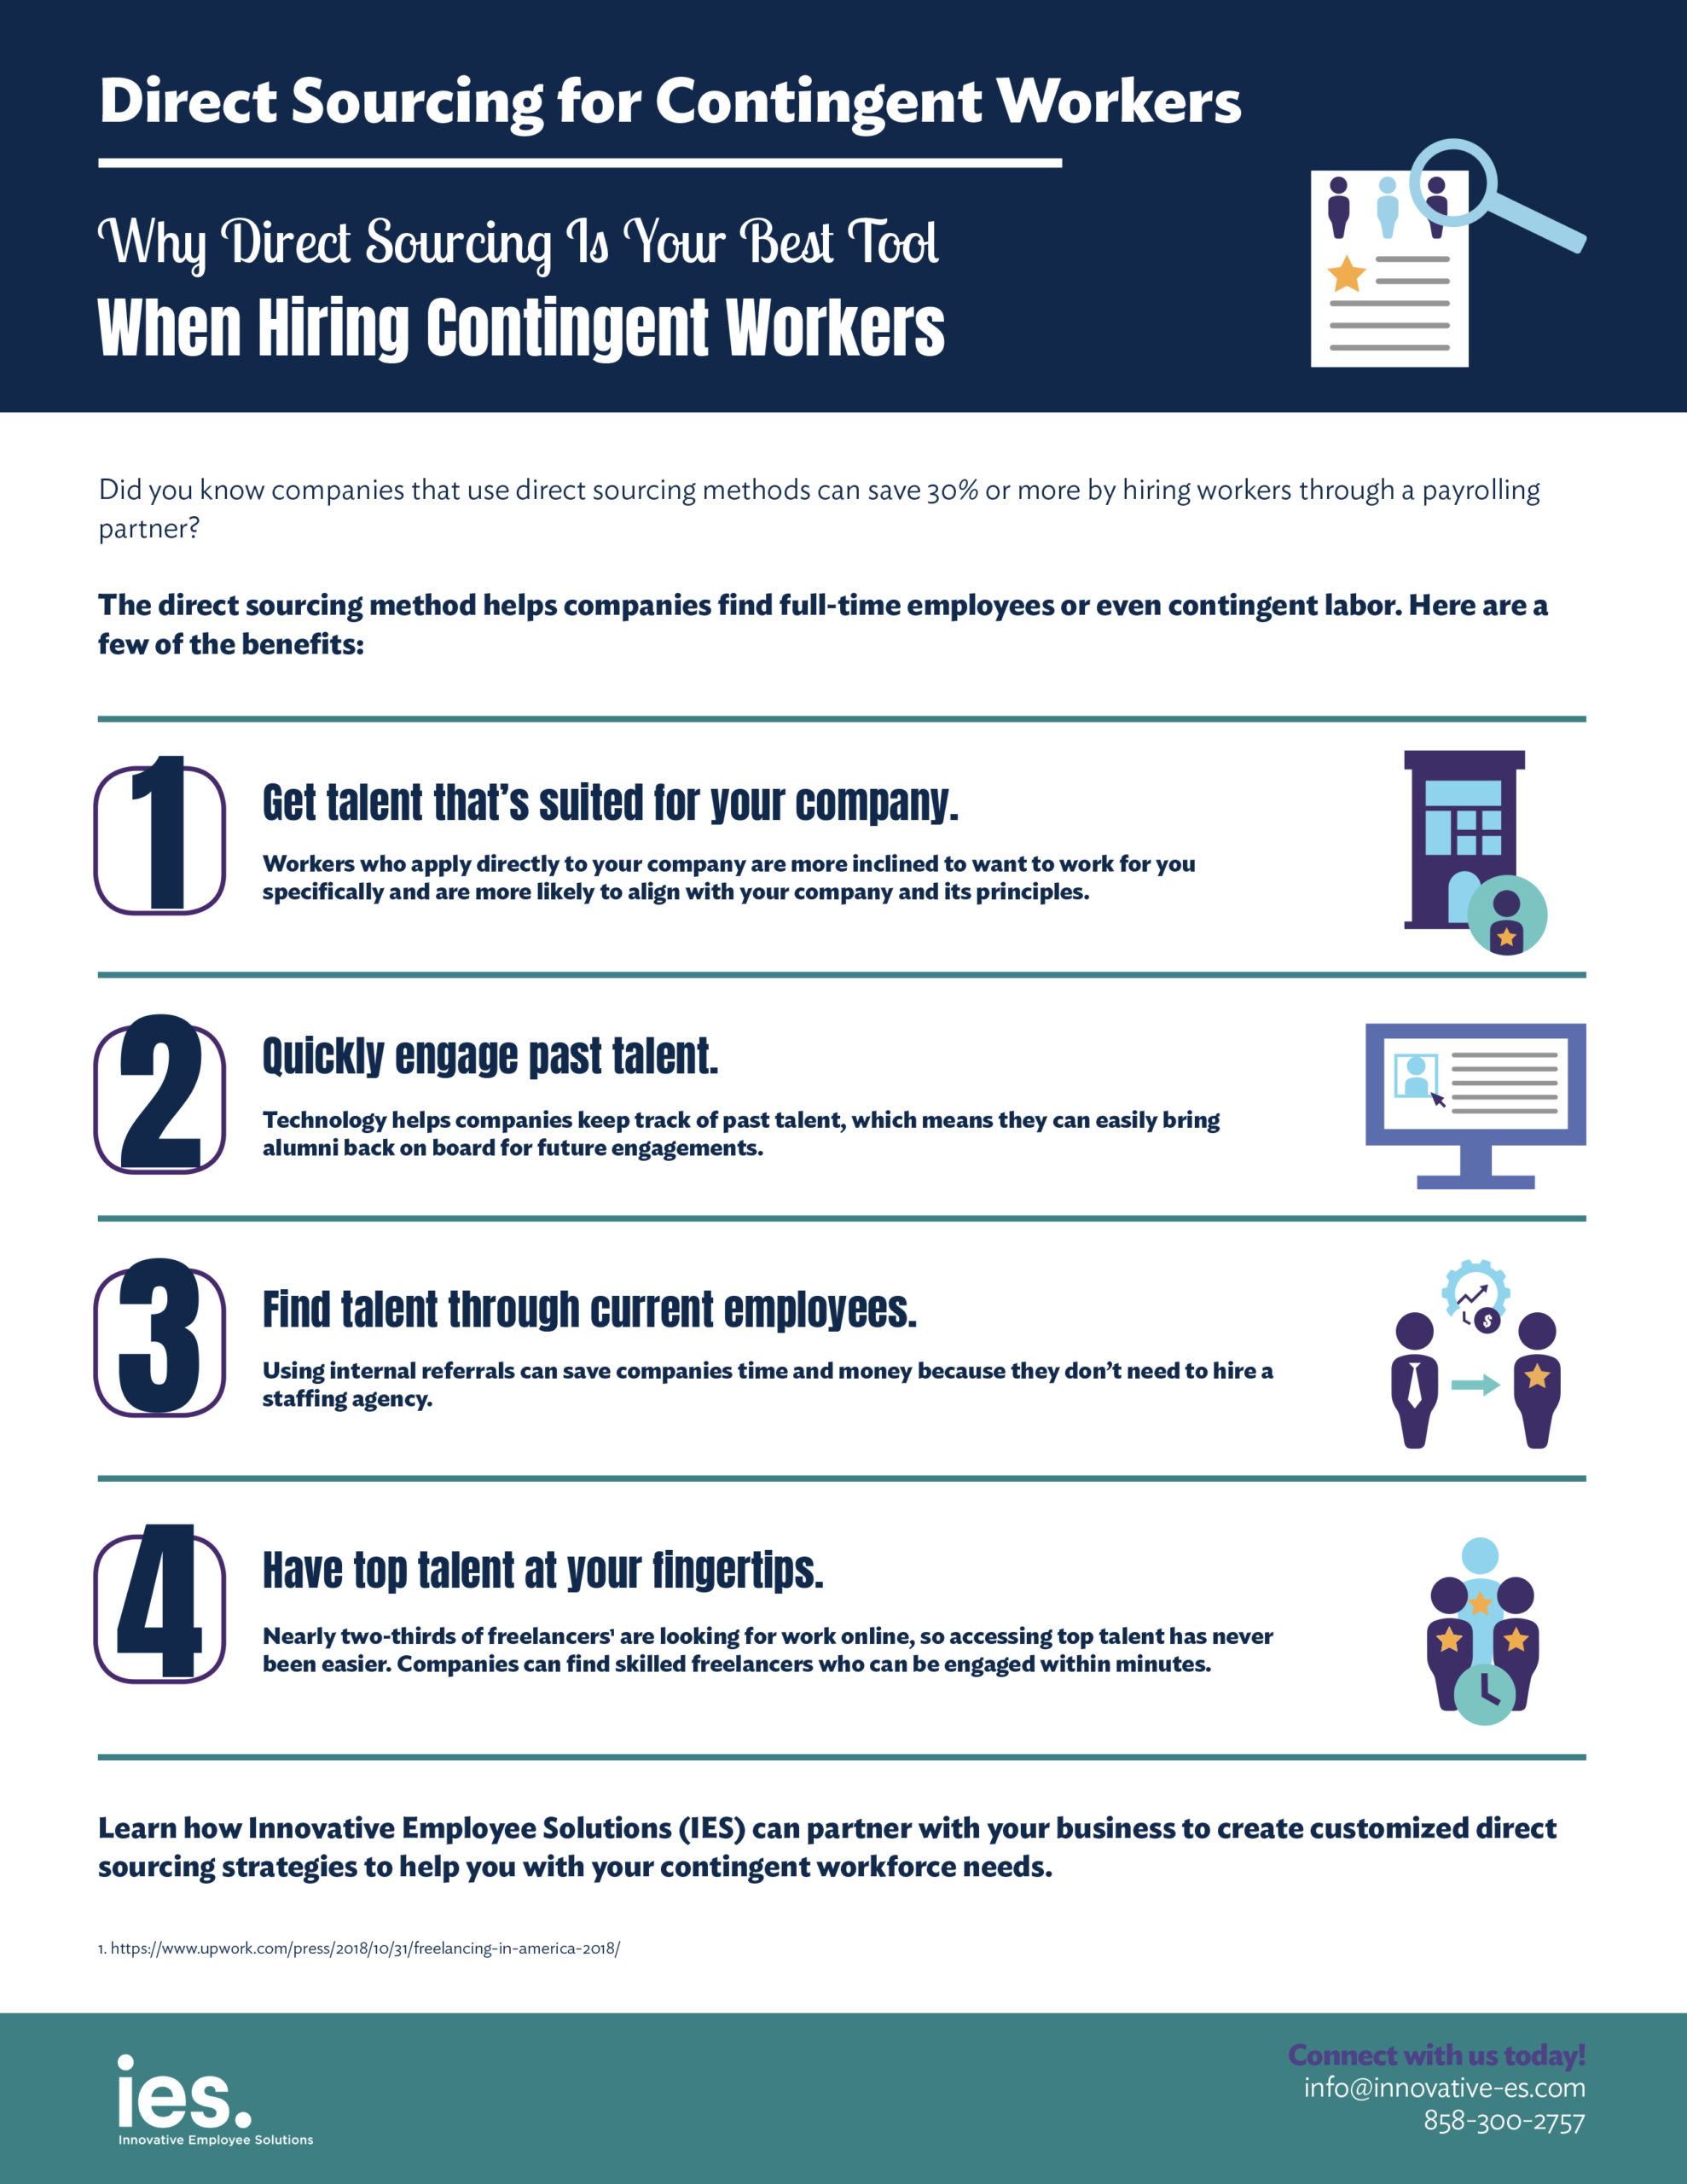 IES Infographic - Why Direct Sourcing Is Your Best Tool When Hiring Contingent Workers